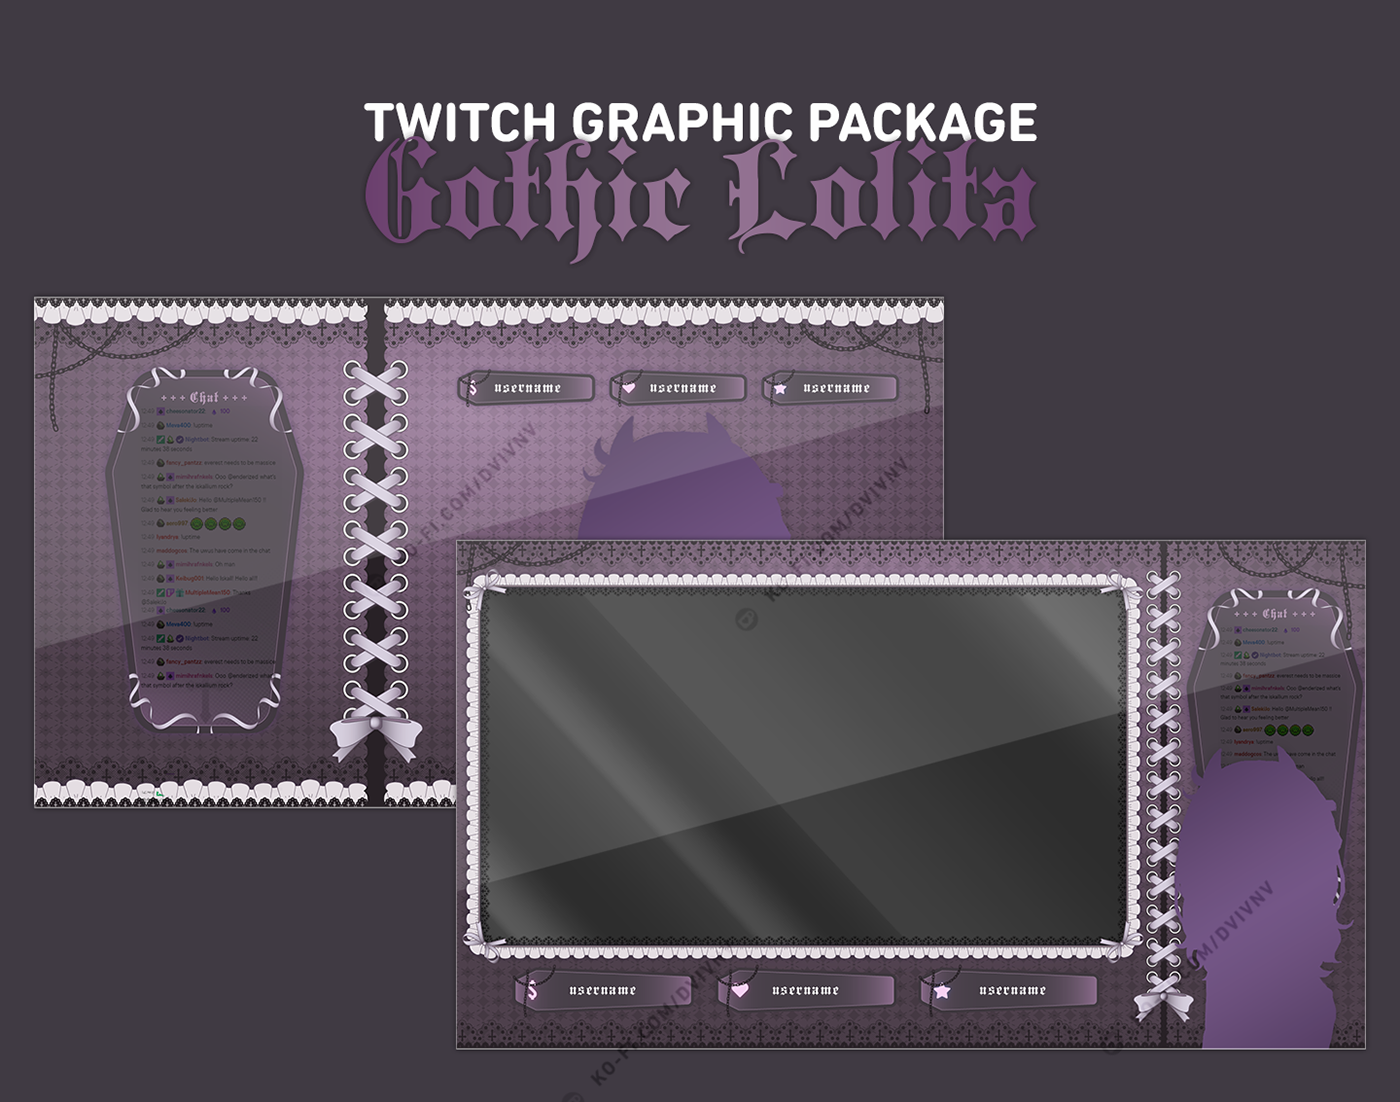 Streaming stream overlay Twitch Graphics Overlay Twitch Overlay Stream design stream Twitch free stream overlay free twitch overlay